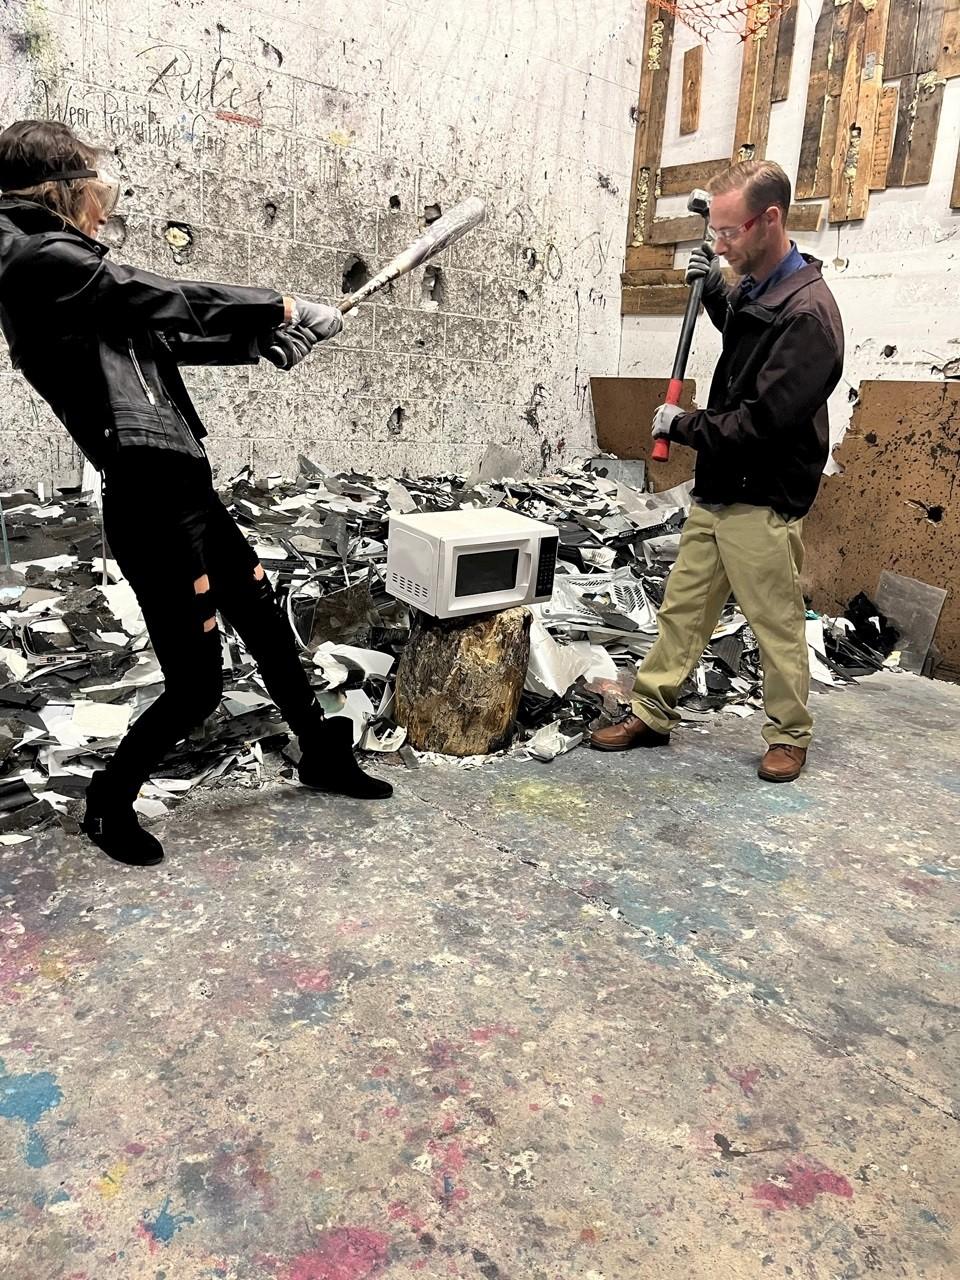 Two people, one wielding a bat and the other a sledgehammer, are poised to smash a small microwave in a cinderblock room.